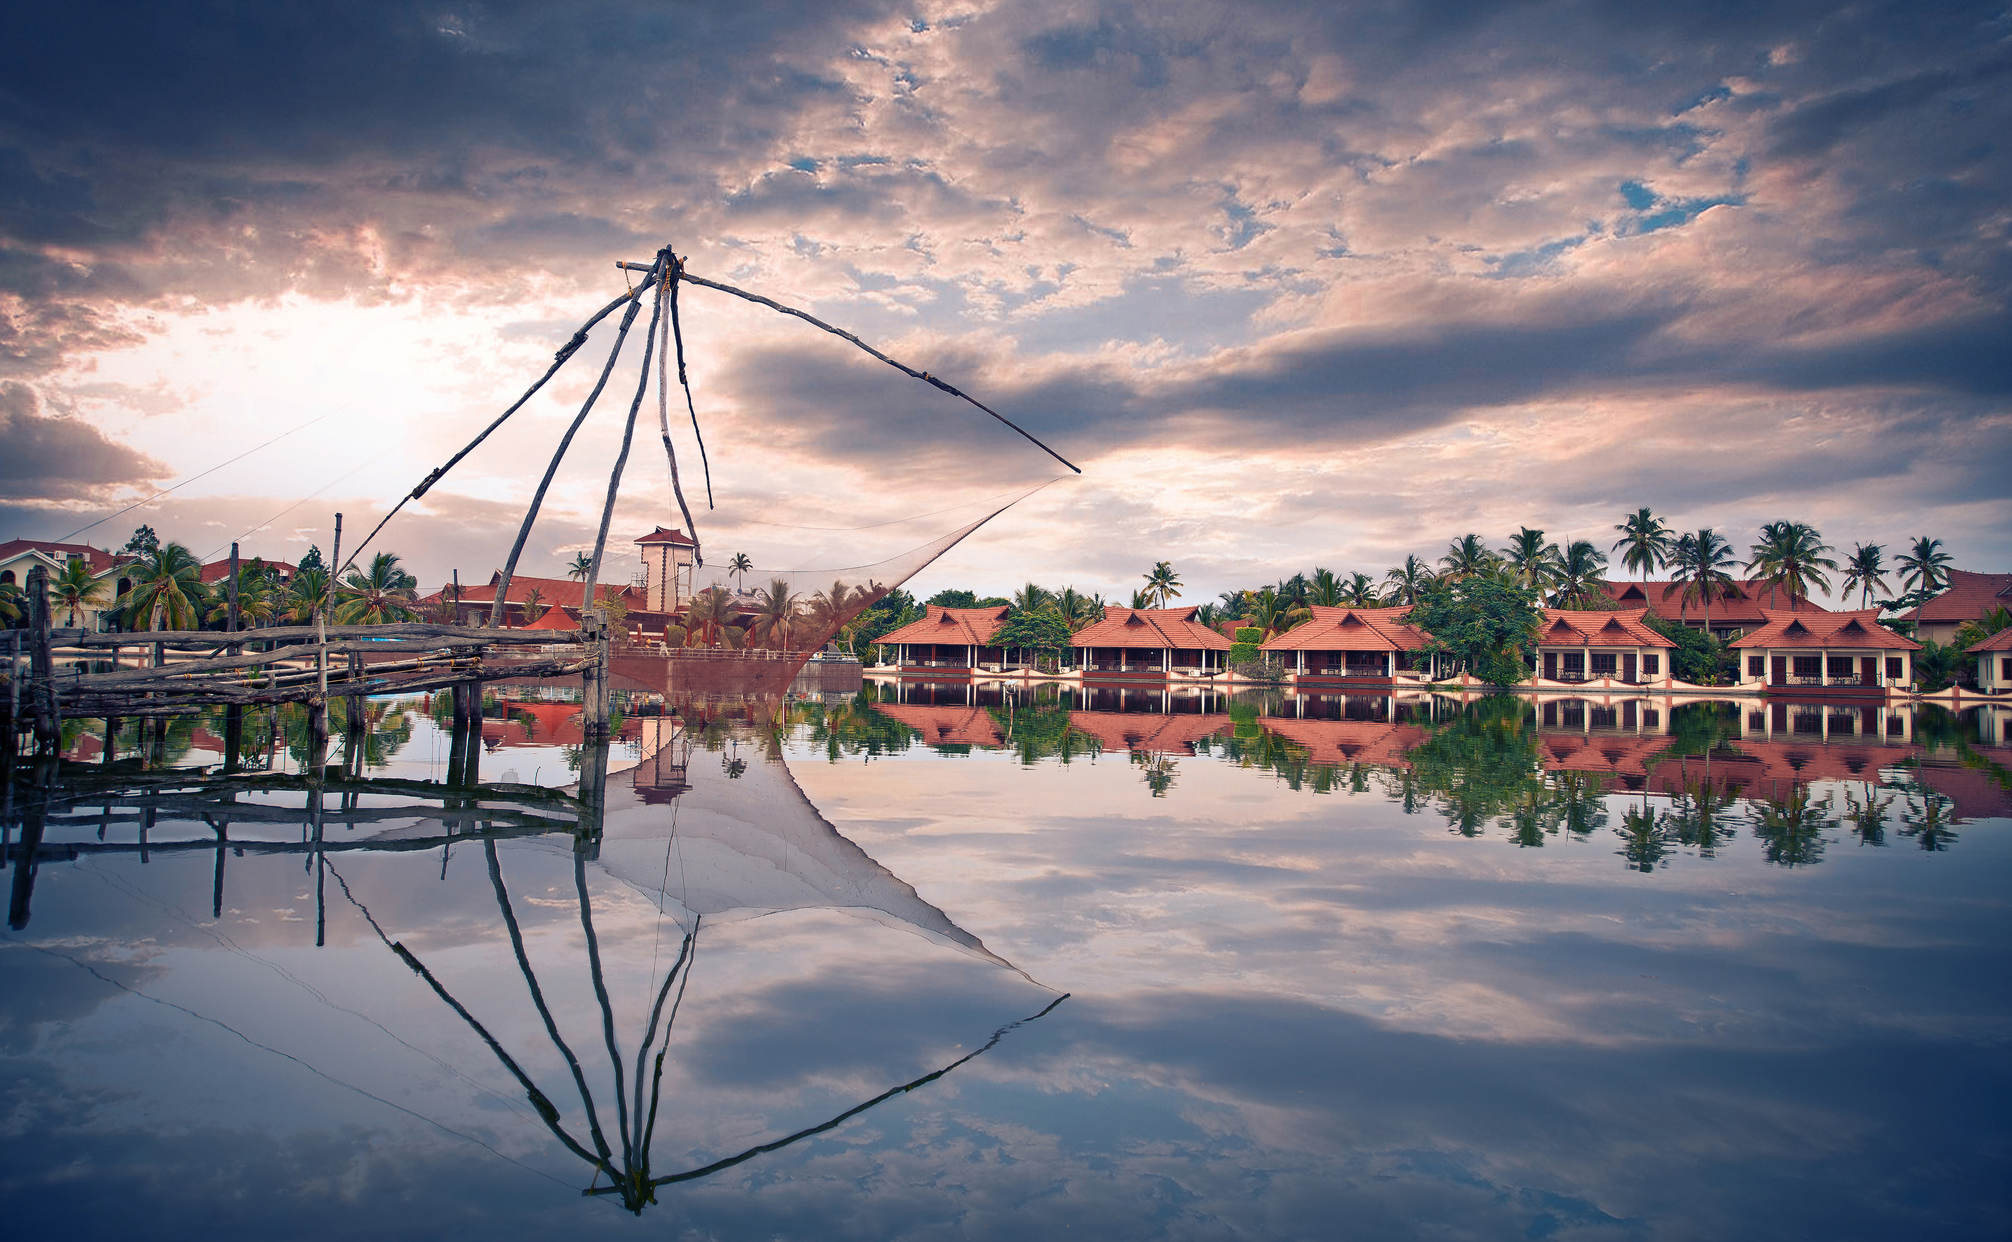 The Lake Palace Resort In Alleppey Has Floating Cottages